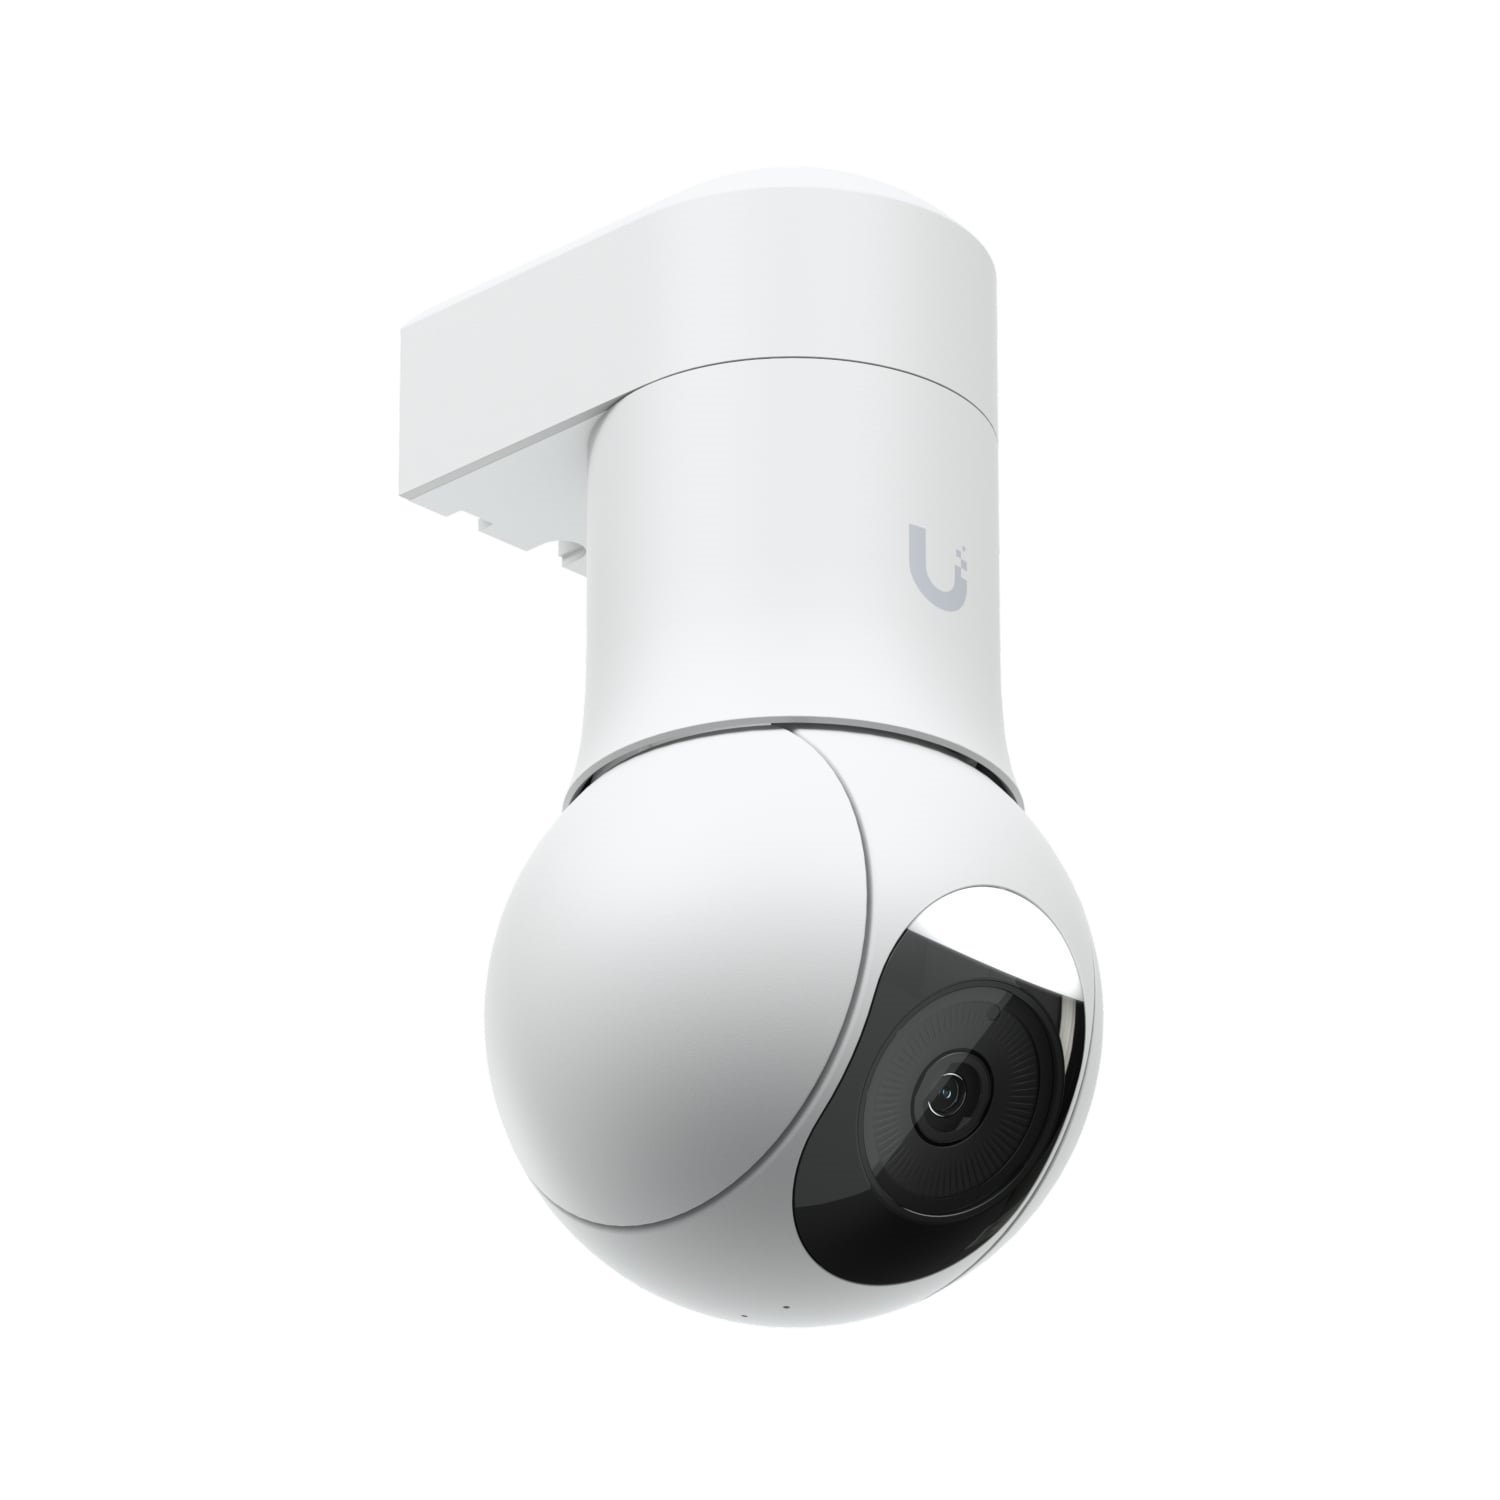 Ubiquiti UniFi Protect G5 PTZ Camera, Campact, Weatherproof 2K HD, Ip66, Remote Pan-Tilt-Zoom Control, Automatic Person Tracking, 2 YR Warr